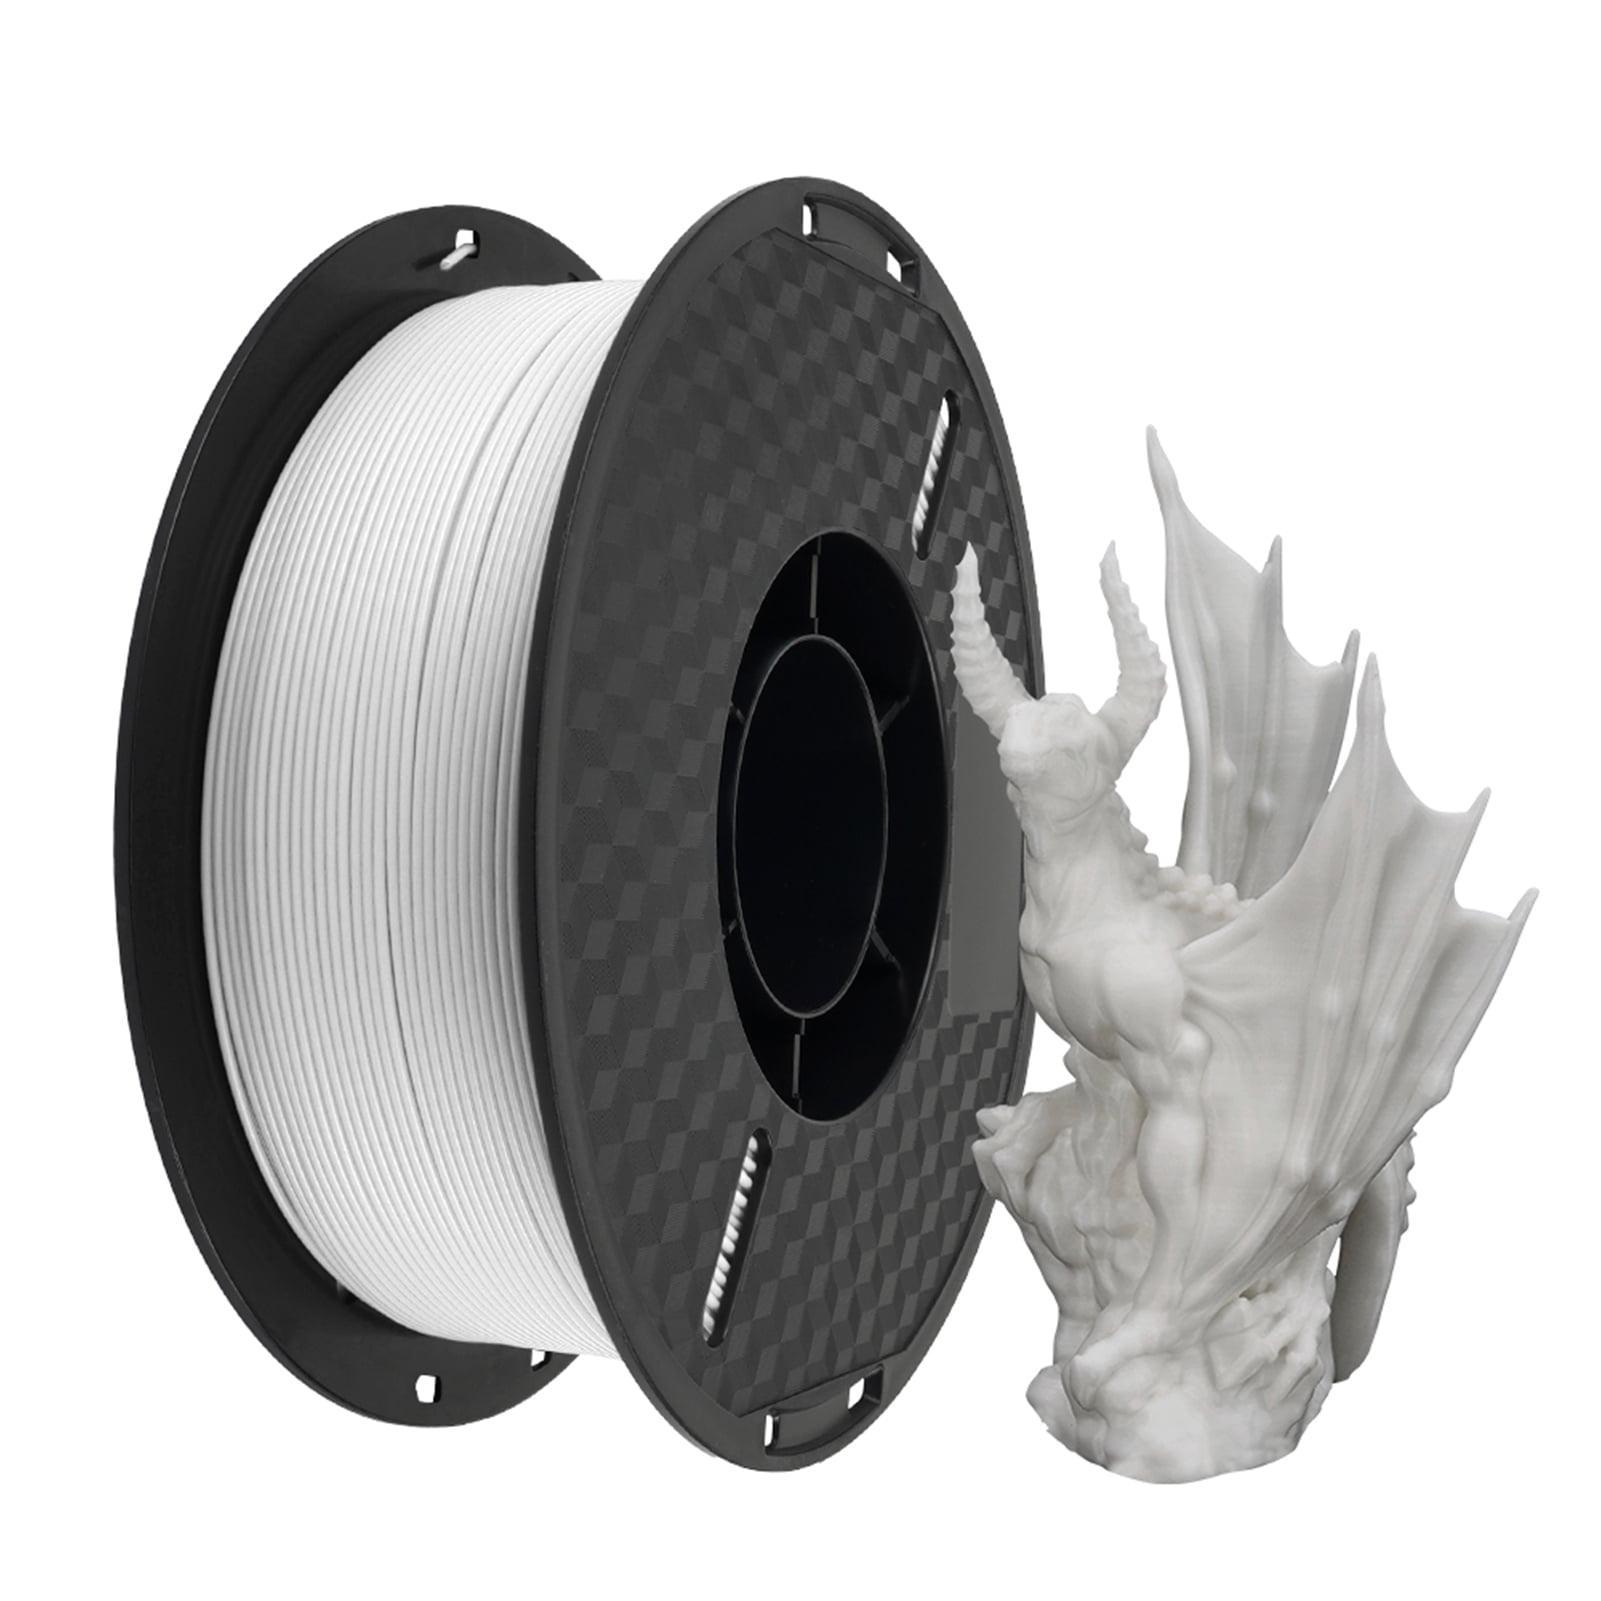 Arealer Creality Hyper PLA Filament 1.75mm High Fluidity High